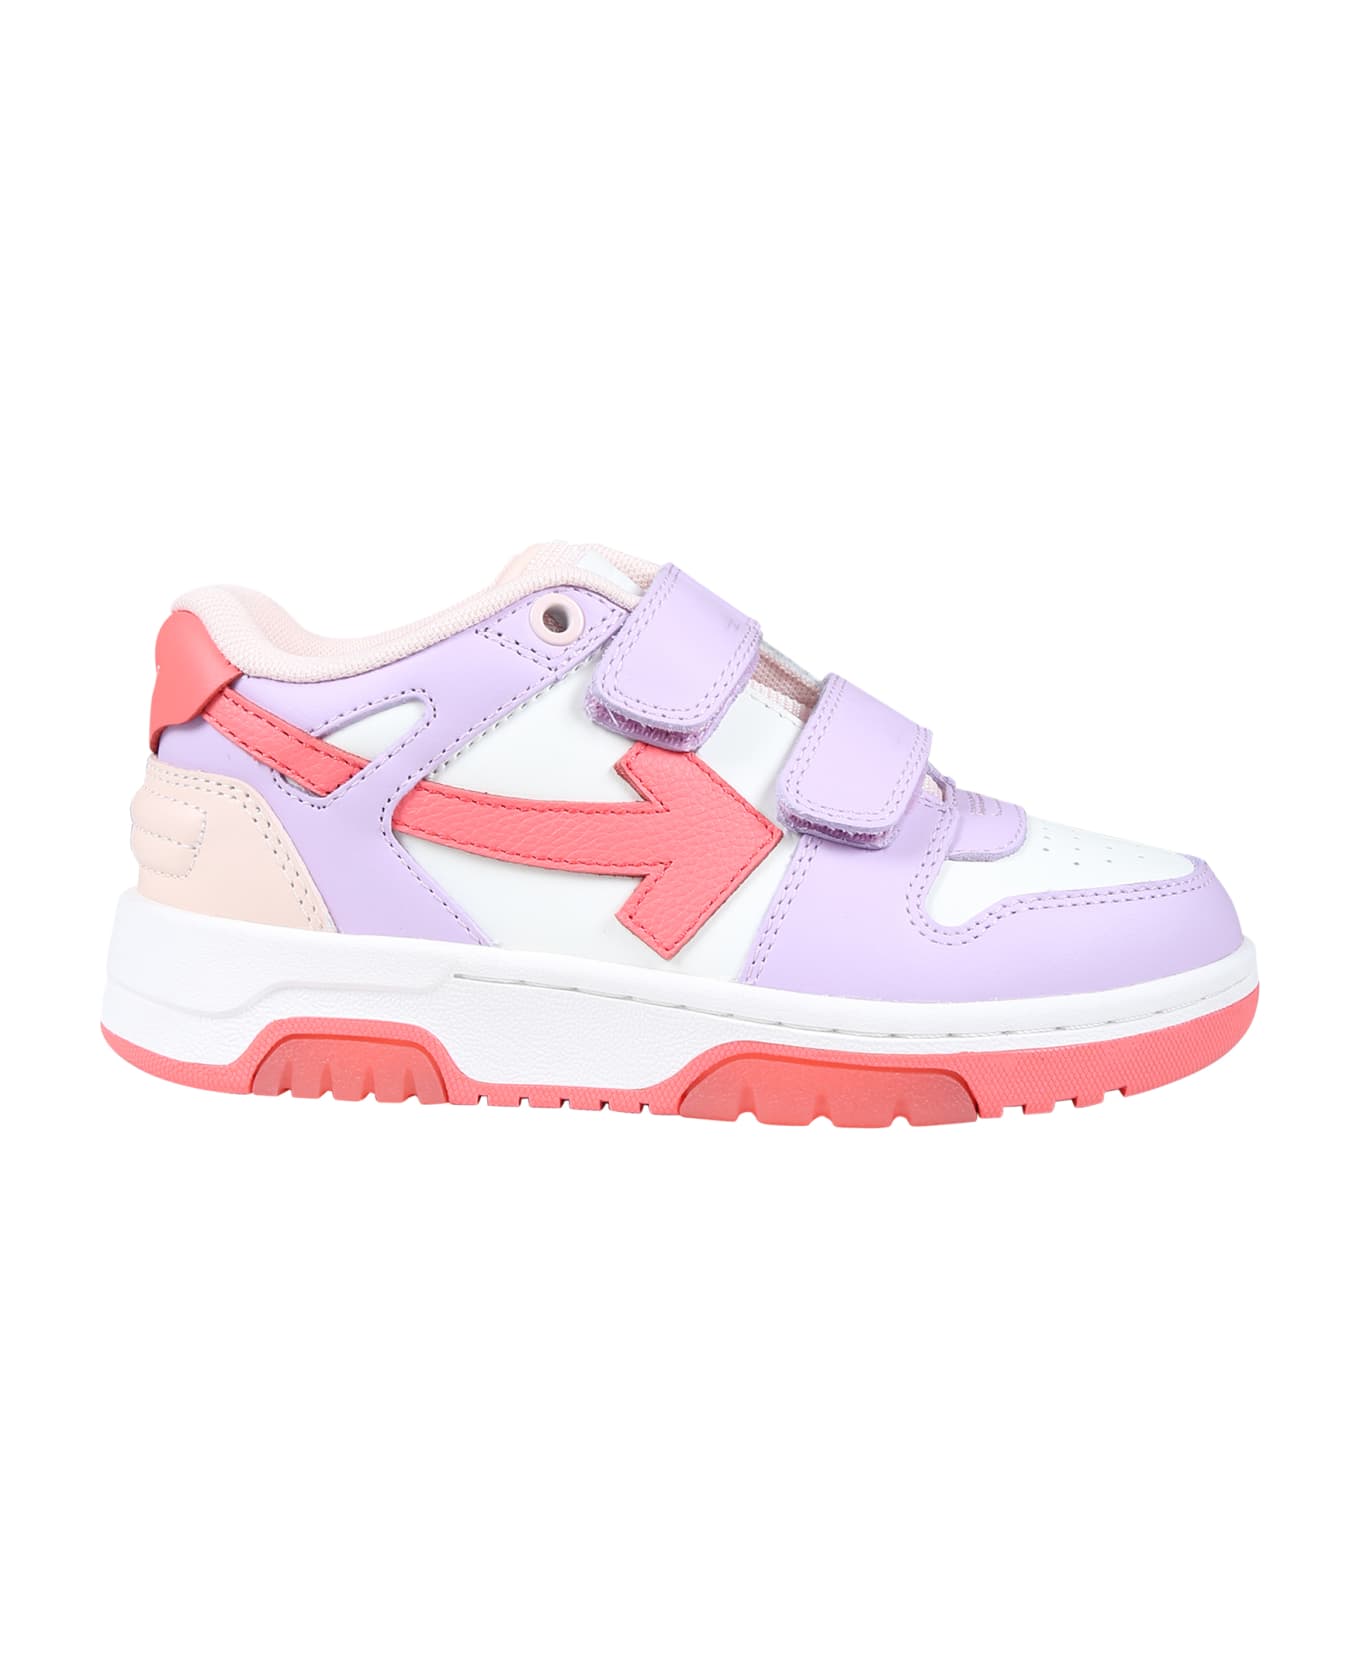 Off-White Pink Sneakers For Girl With Arrows - Multicolor